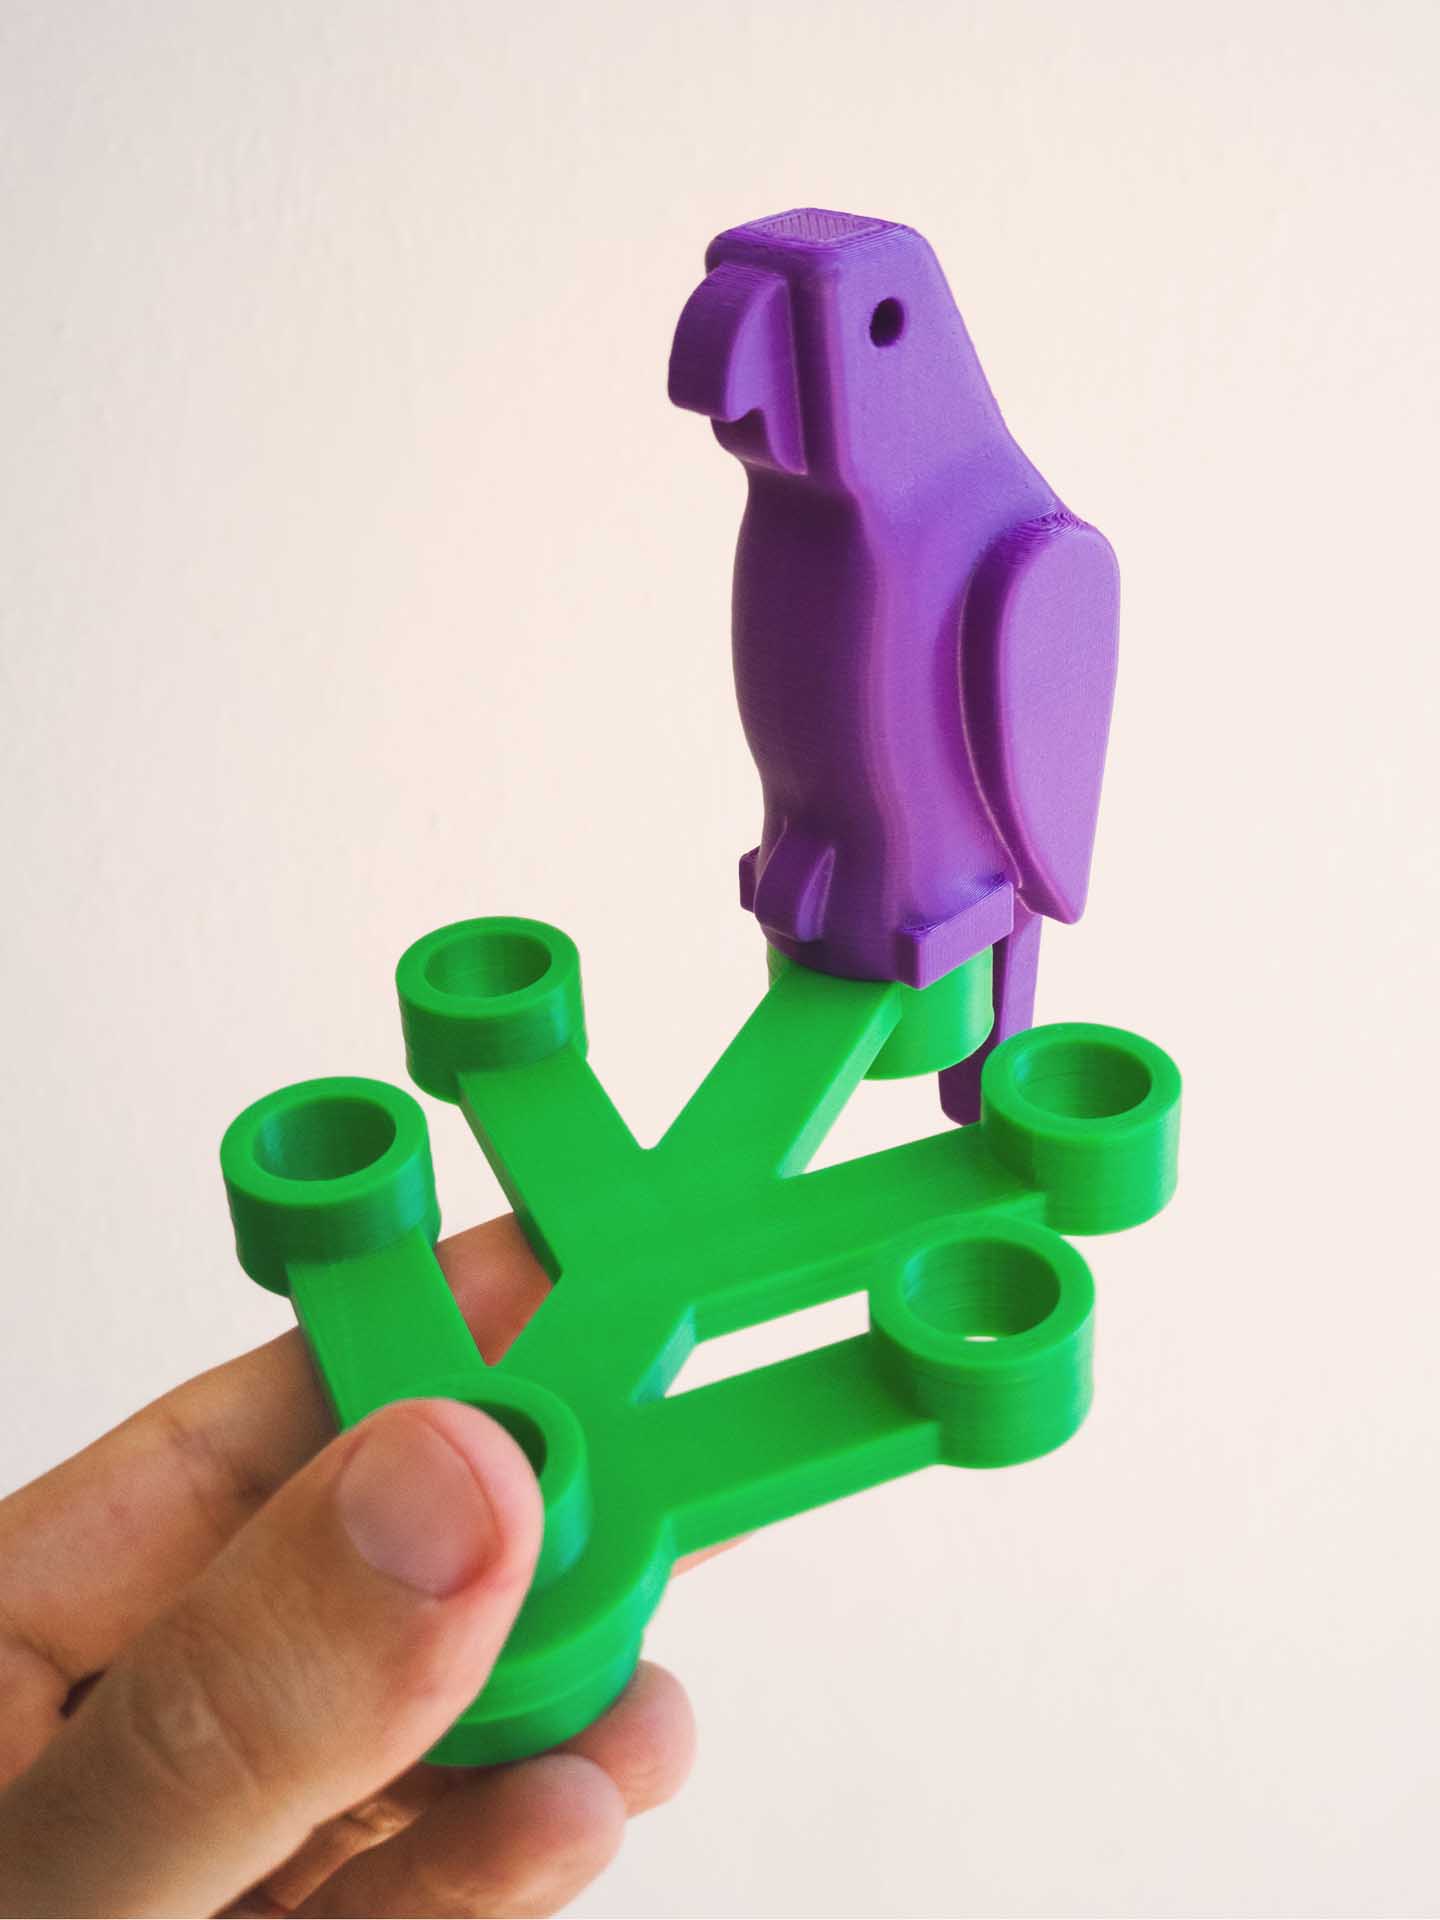 3D printed LEGO parrot